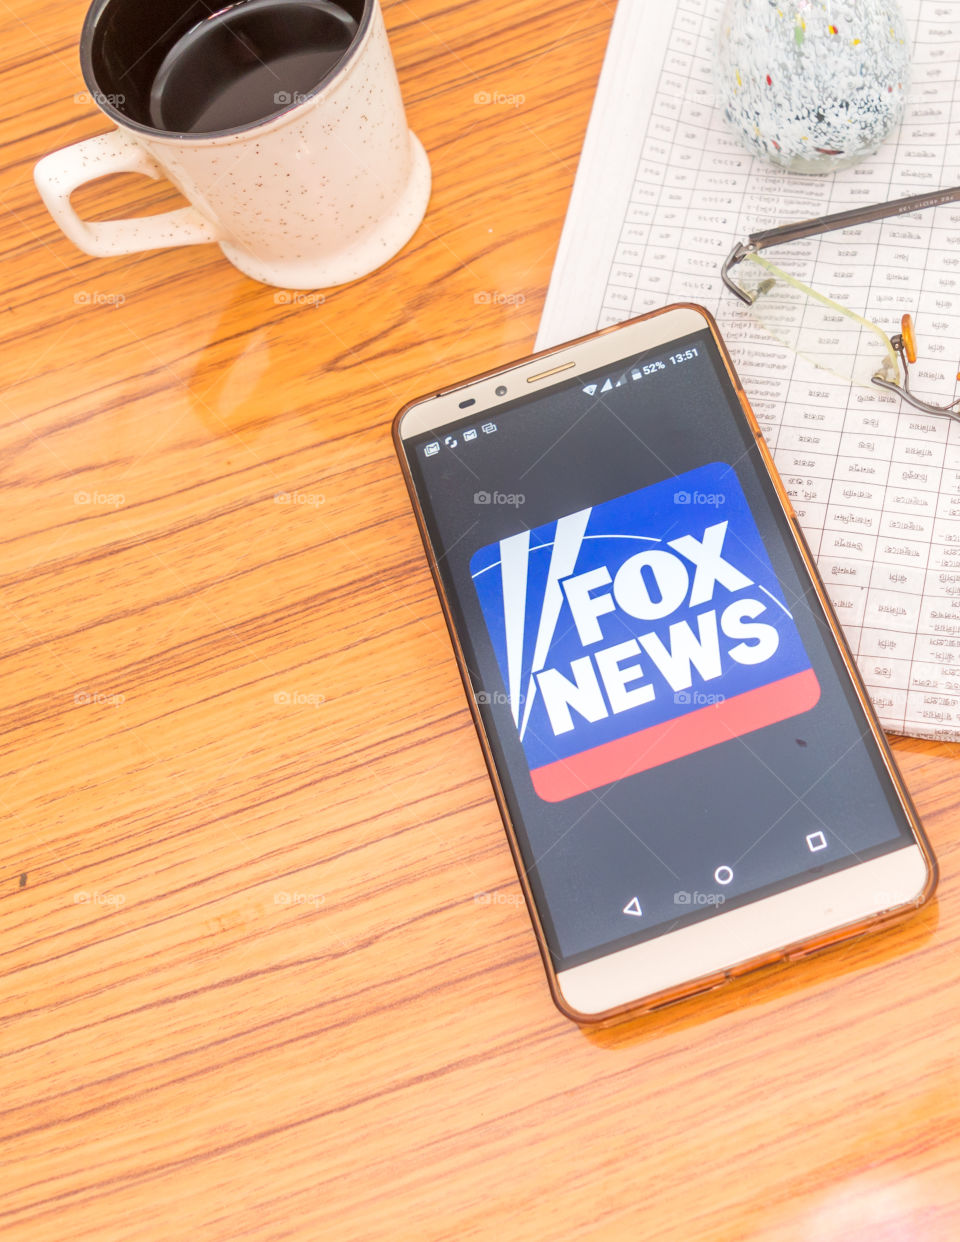 Kolkata, India, February 3, 2019: Fox news app (application) visible on mobile phone screen beautifully placed over a wooden table with a newspaper and a cup of coffee. A Technology Product Shoot.